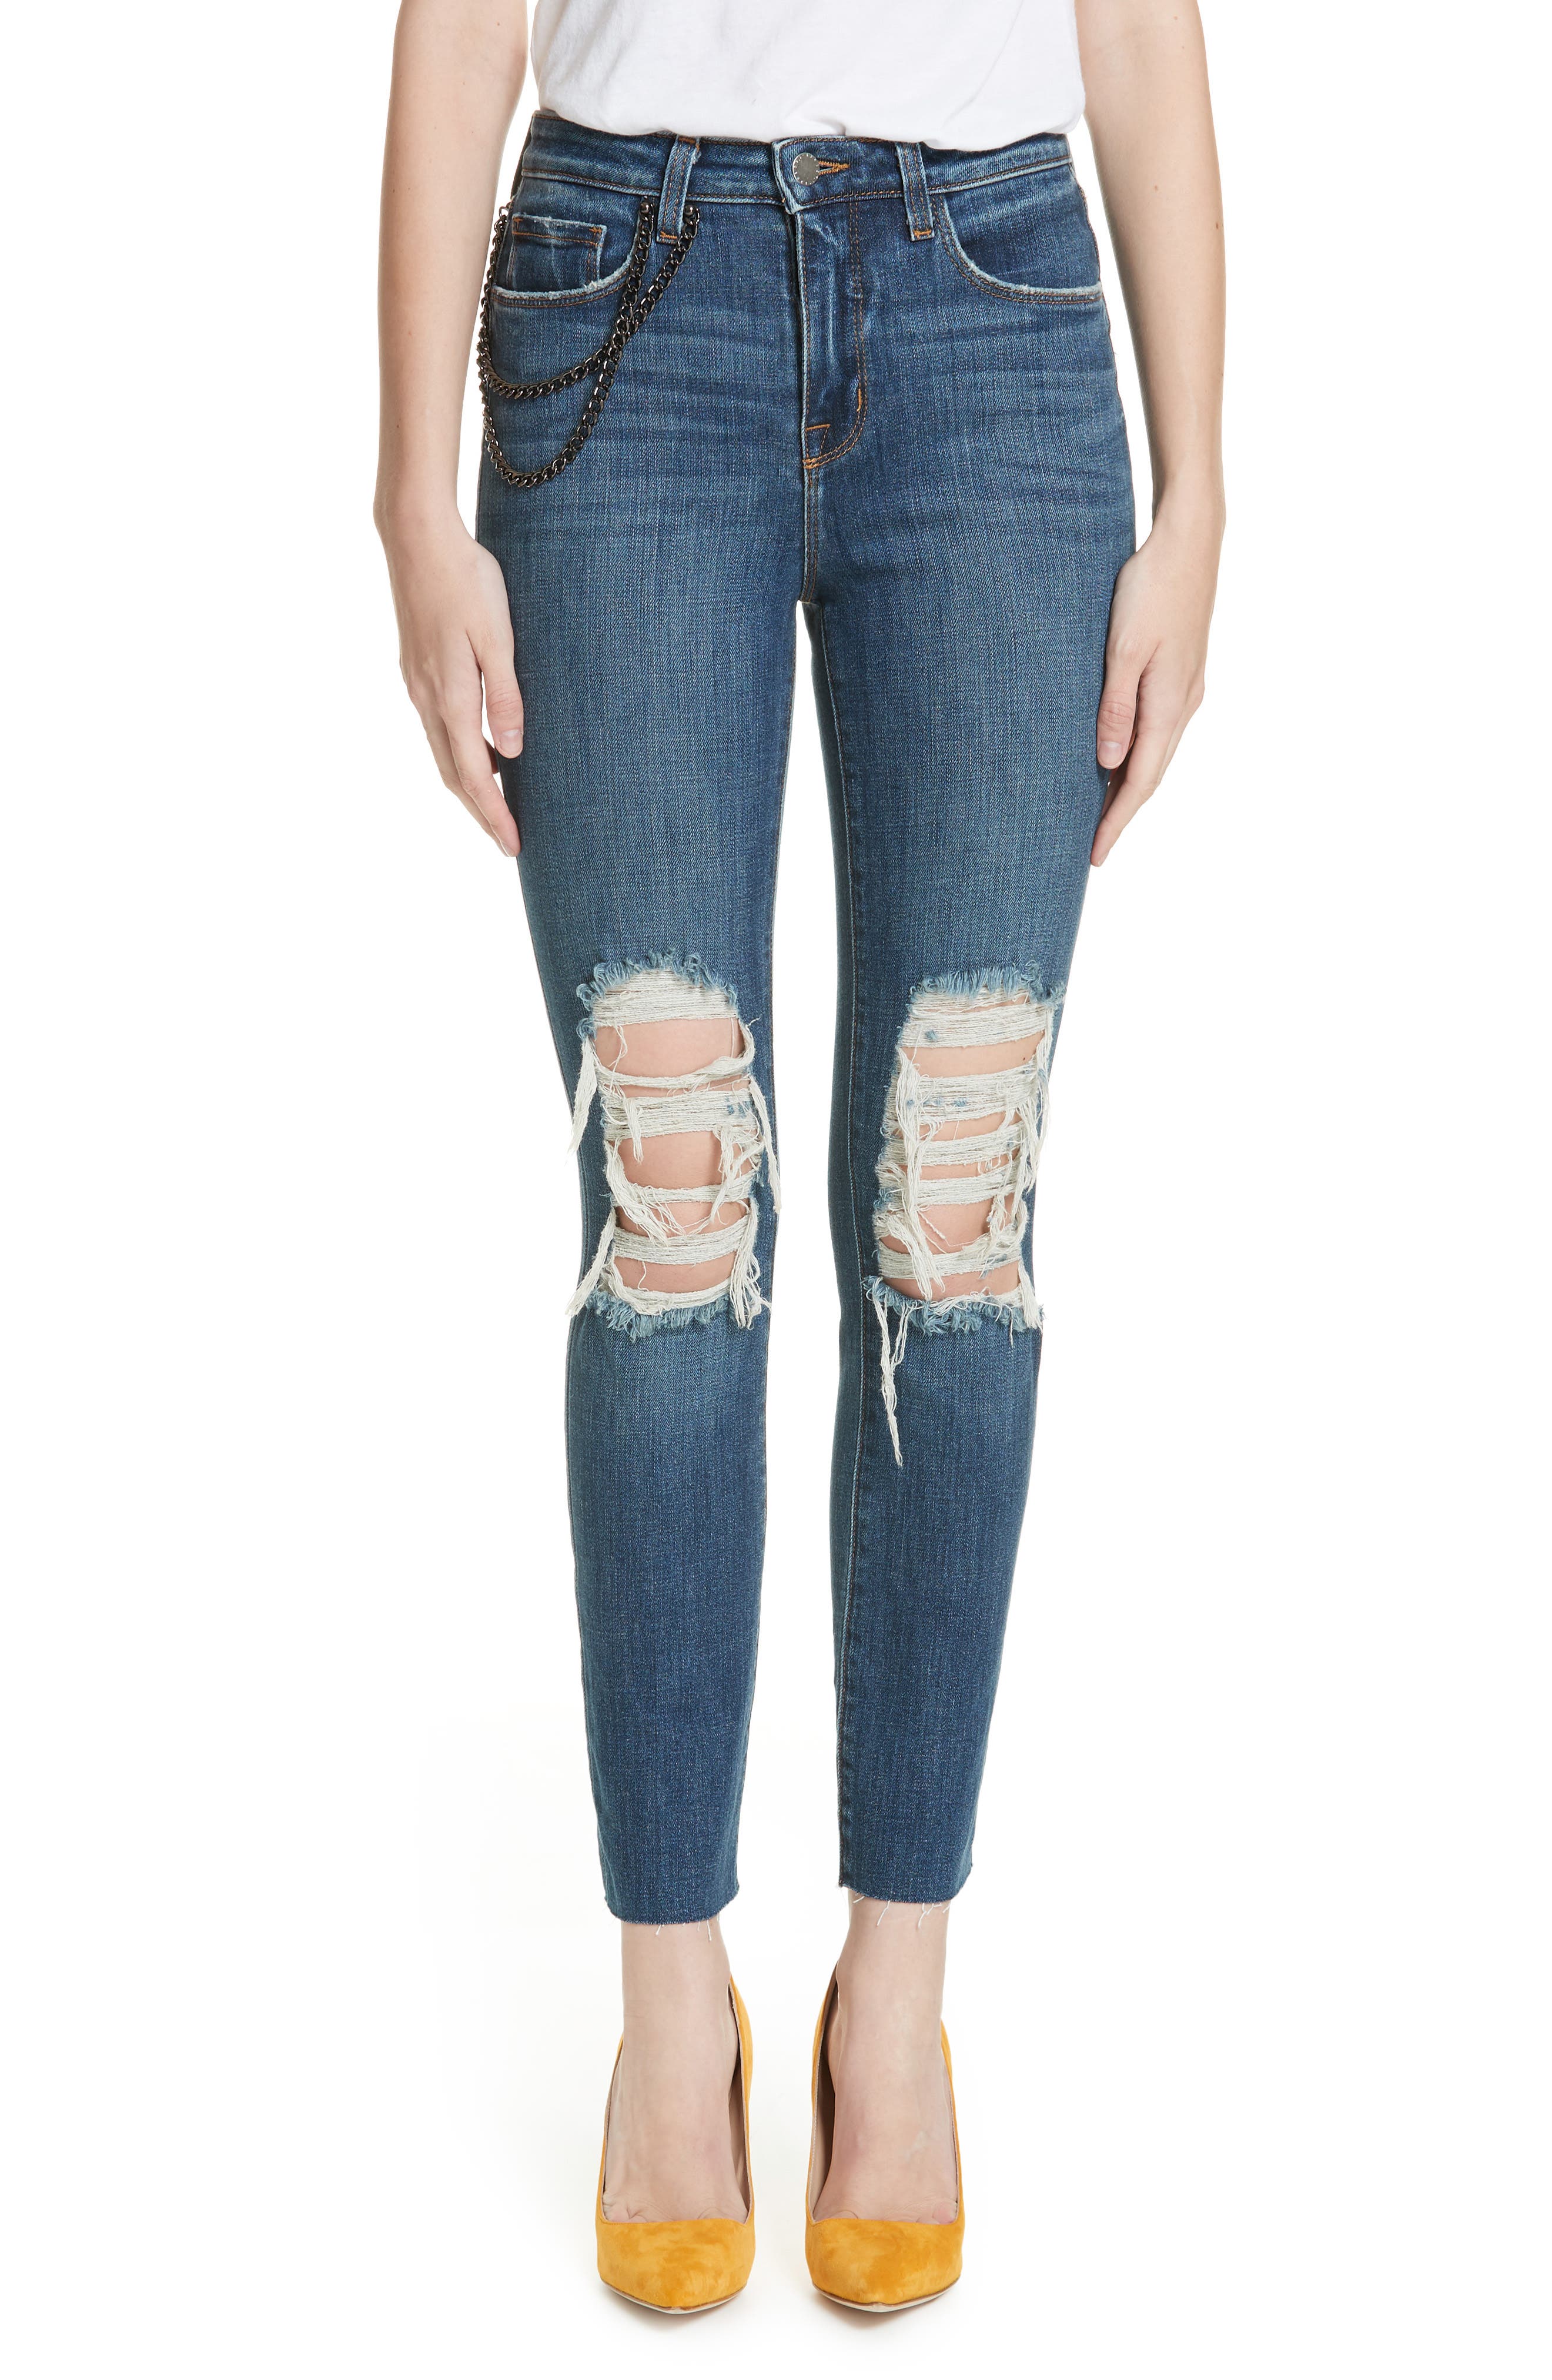 jeans with chain detail